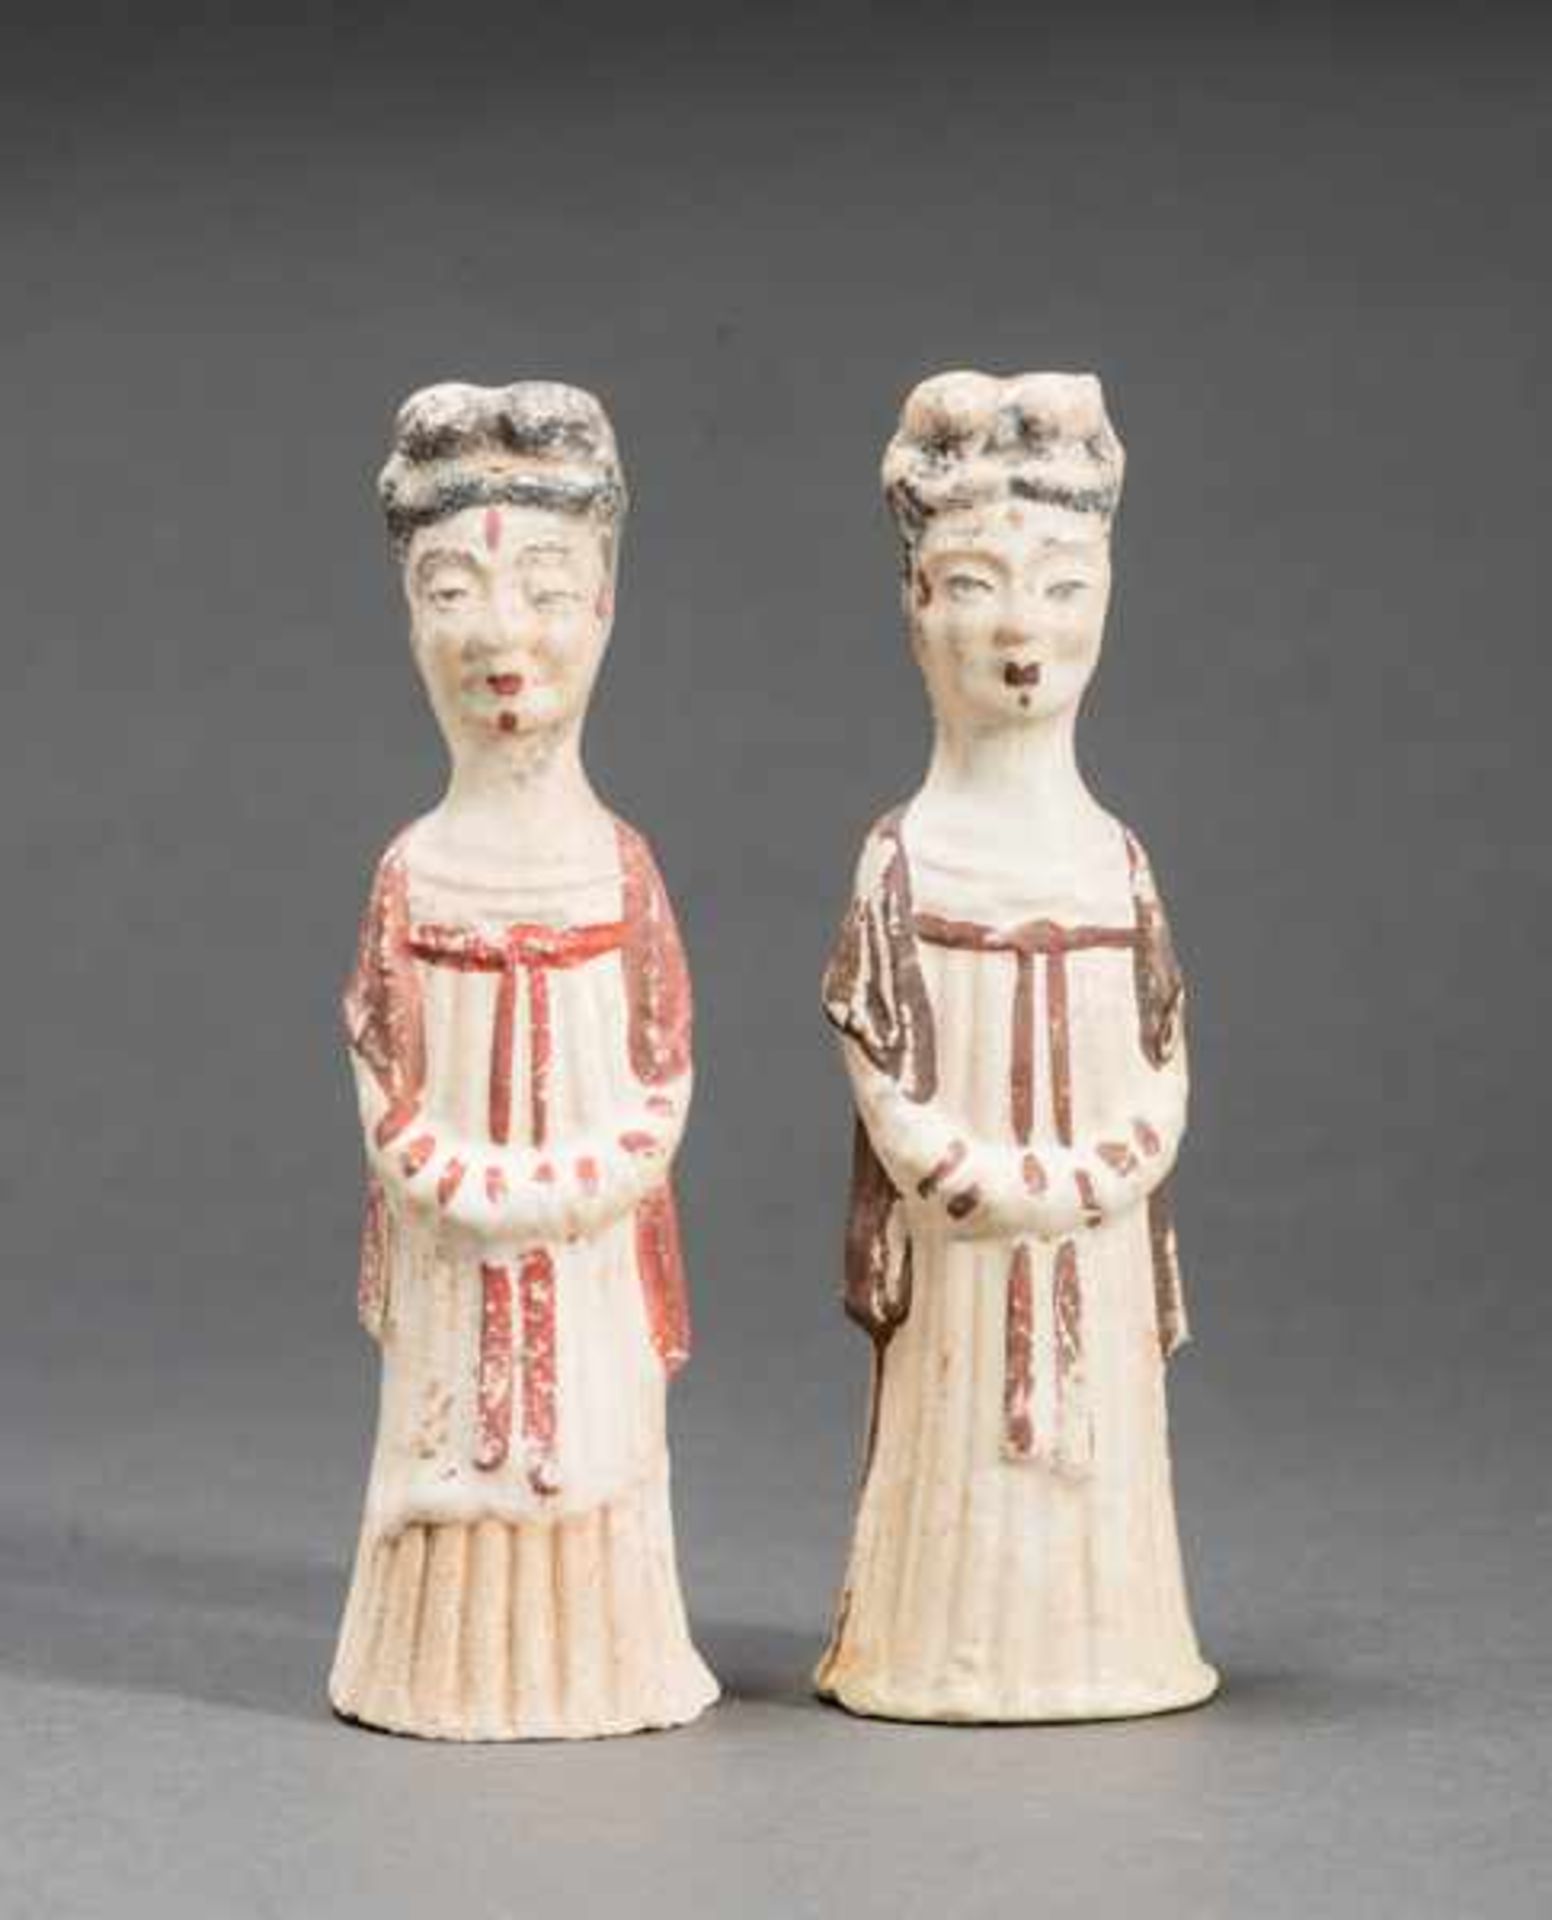 TWO COURTLY LADIES Glazed ceramic with painting. China, Northern Weidynasty (385-535)Dating by TL